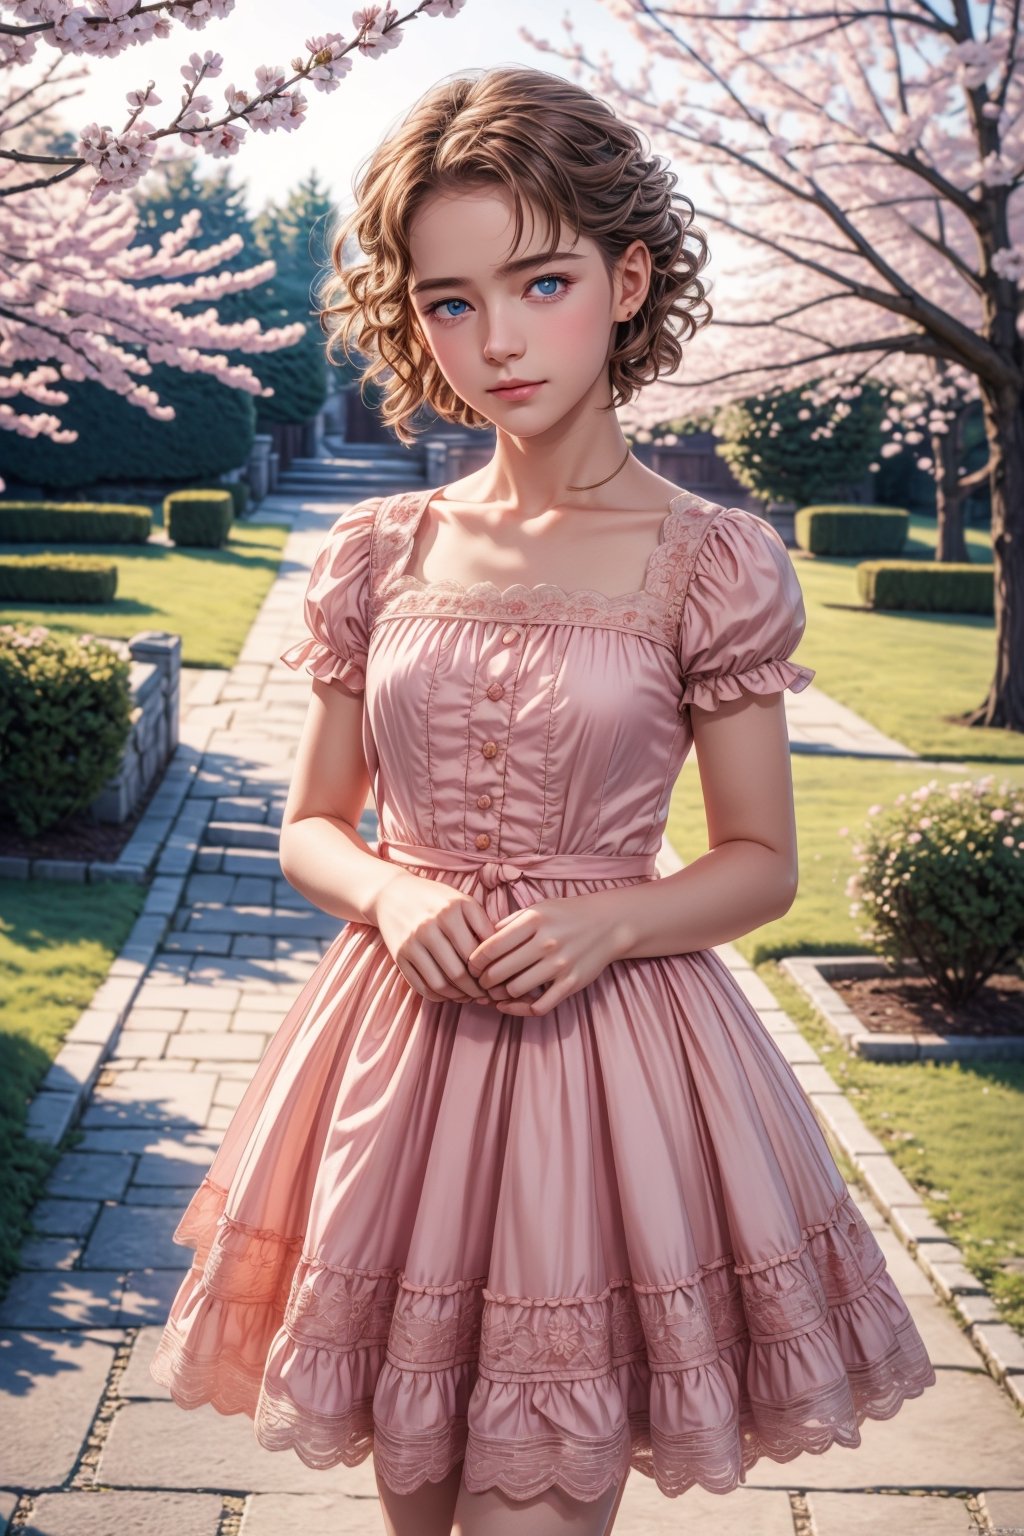 (ultra detailed, ultra highres), (masterpiece, top quality, best quality, official art :1.4), (high quality:1.3), (1 boy, 1 girl :1.6), cinematic, (muted colors, dim colors), (perfect eyes, perfect face:1.3), long-lenses photograph, realistic, UHD, 16K, 8K, warm glow, extremely detailed CG, (perfect hands, perfect fingers, nice hands), photorealistic, perfect shadow, perfect lighting, a noble little girl wearing a pink dress and a daisy tiptoes towards a boy with curly hair, reaching out a delicate rose in a thornless stem, standing on cobblestone pavement, under a cloudless sky, with a row of blooming cherry blossom trees in the background, captured with a Canon EOS 5D Mark IV camera, 50mm lens, medium shot focusing on the girl’s tender gesture, in a style reminiscent of a romantic oil painting by Thomas Kinkade,